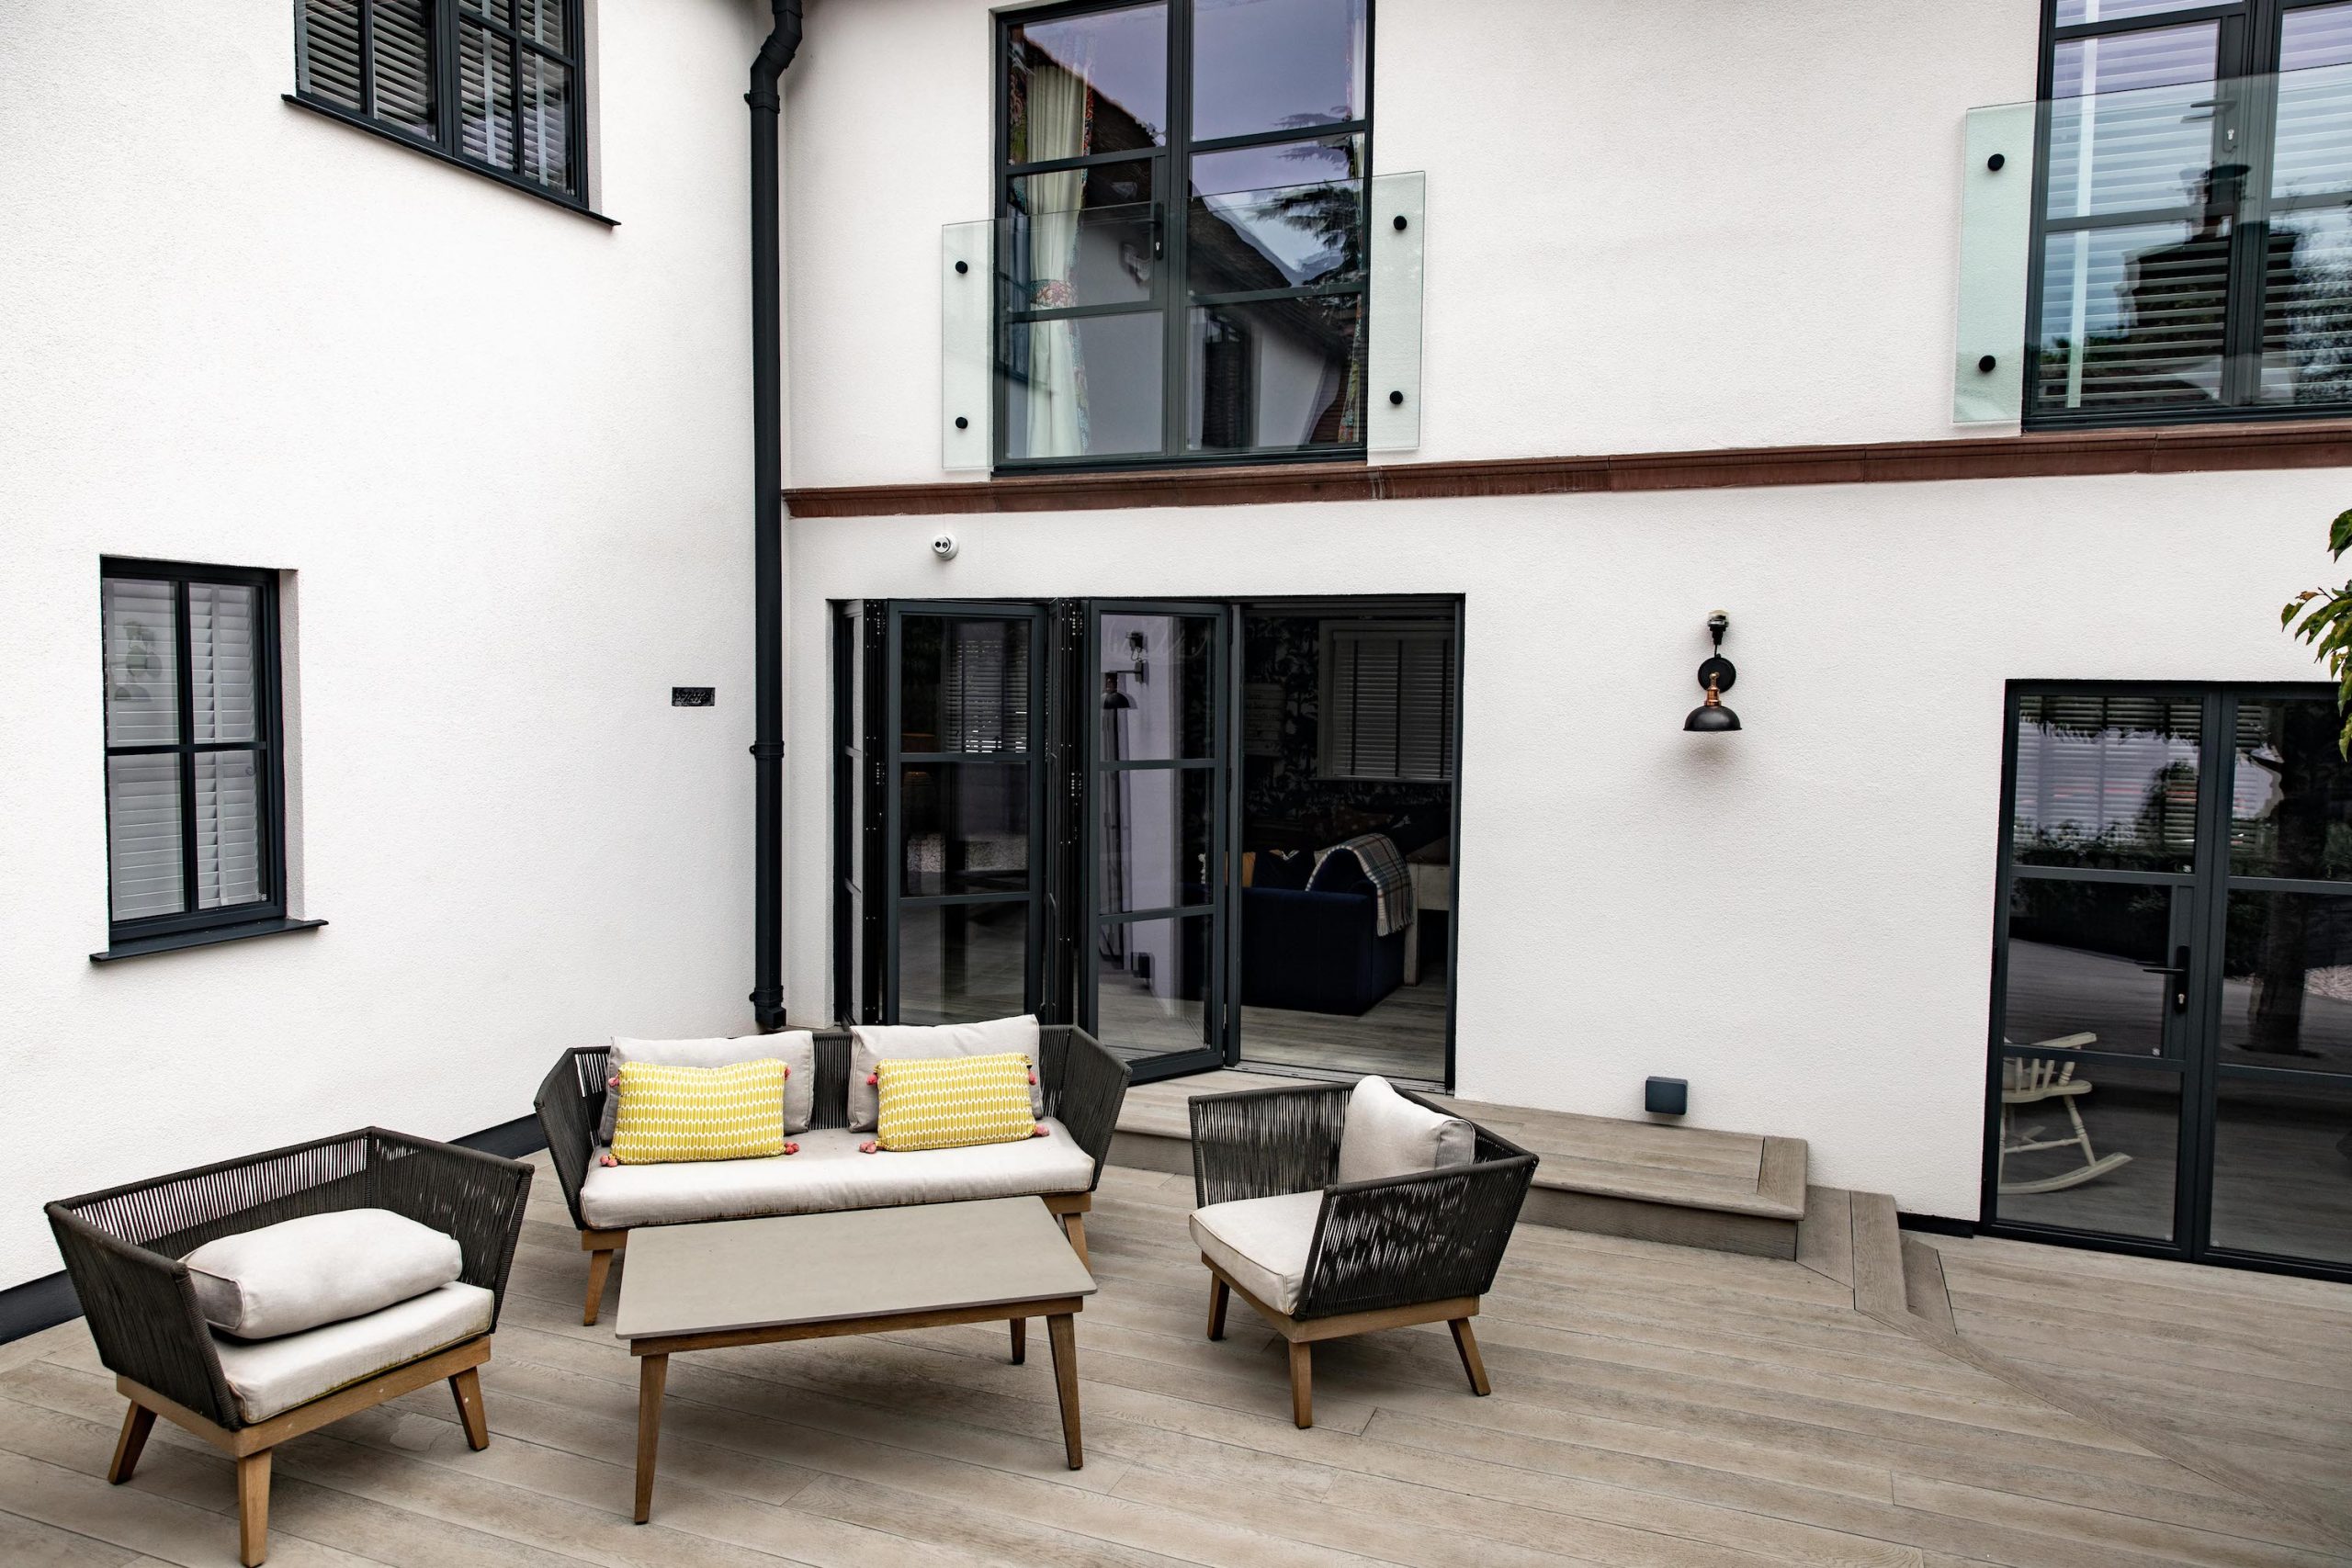 Garden sofas and chairs are shown against glass windows and doors are shown in the white walls of Woodbrook Place, Cheshire.